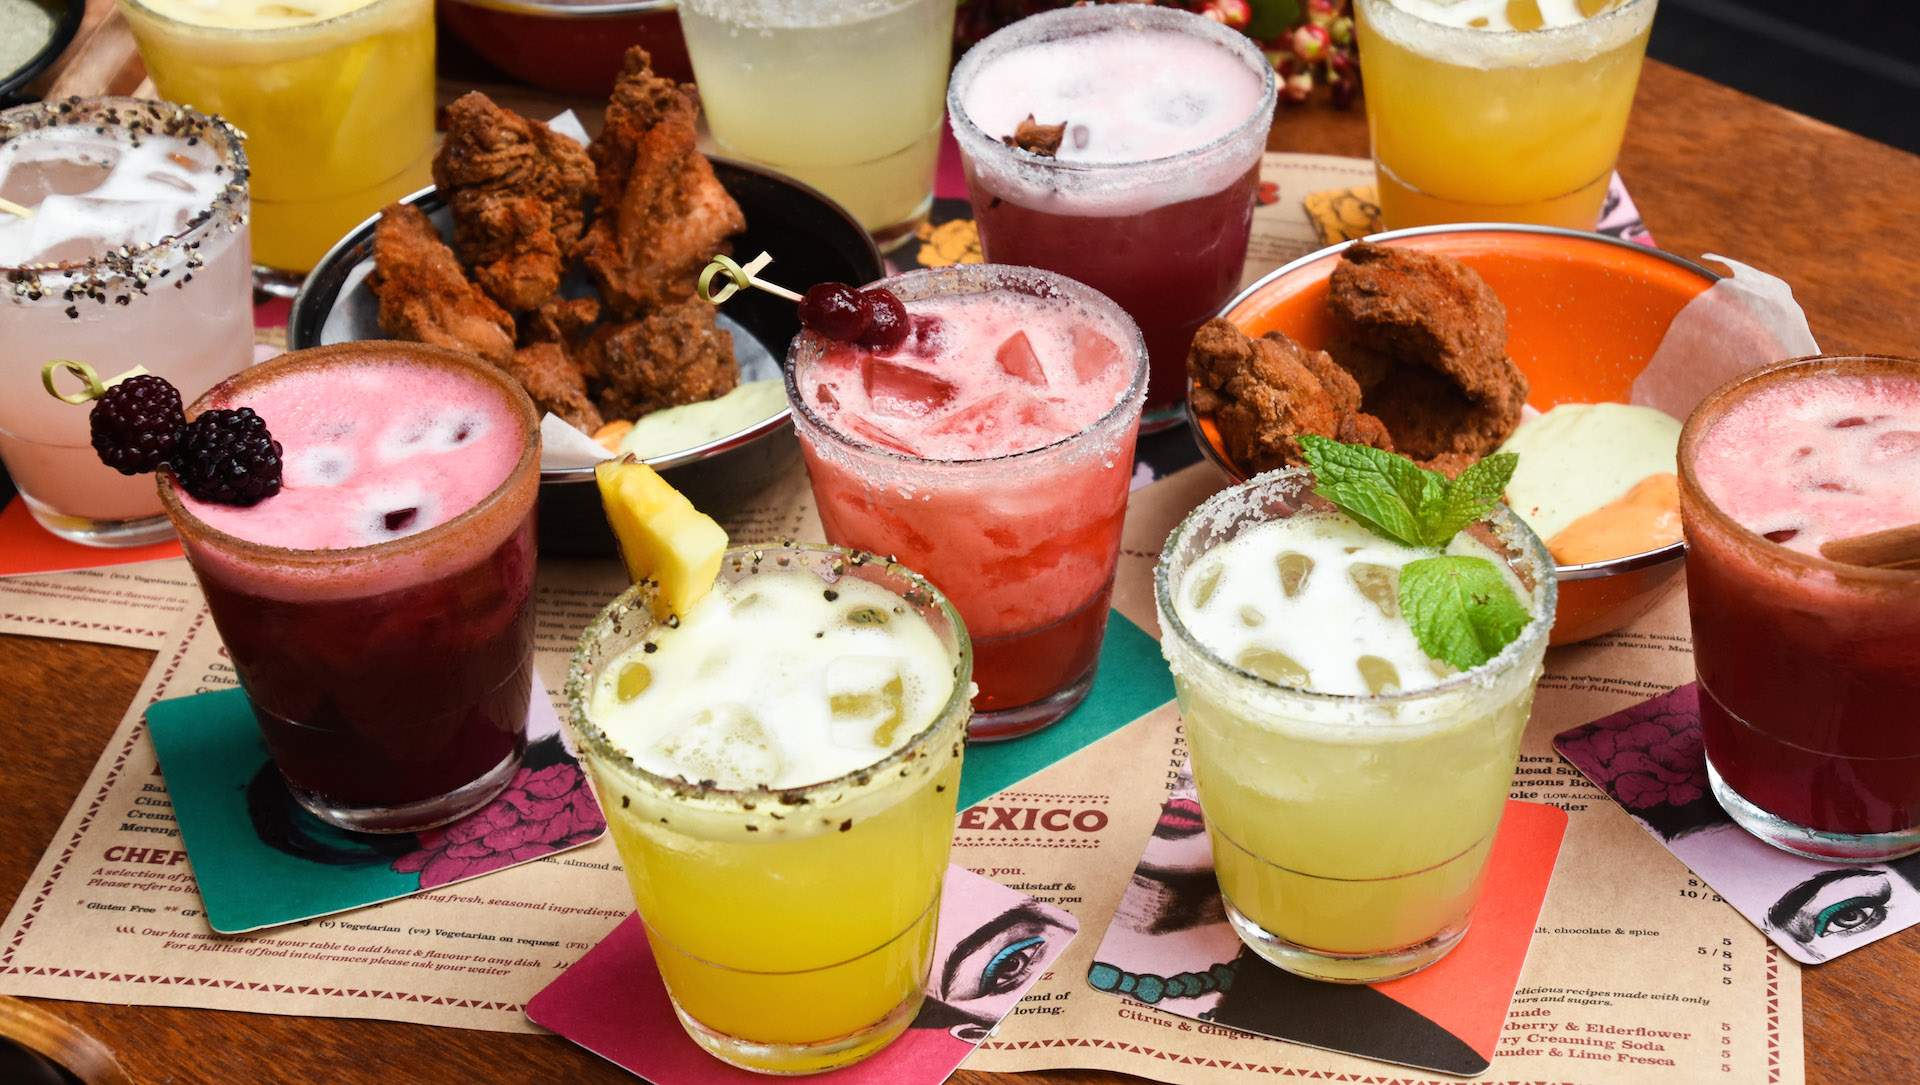 We're Giving Away a Dining Voucher for Frida's Margaritas at Mexico